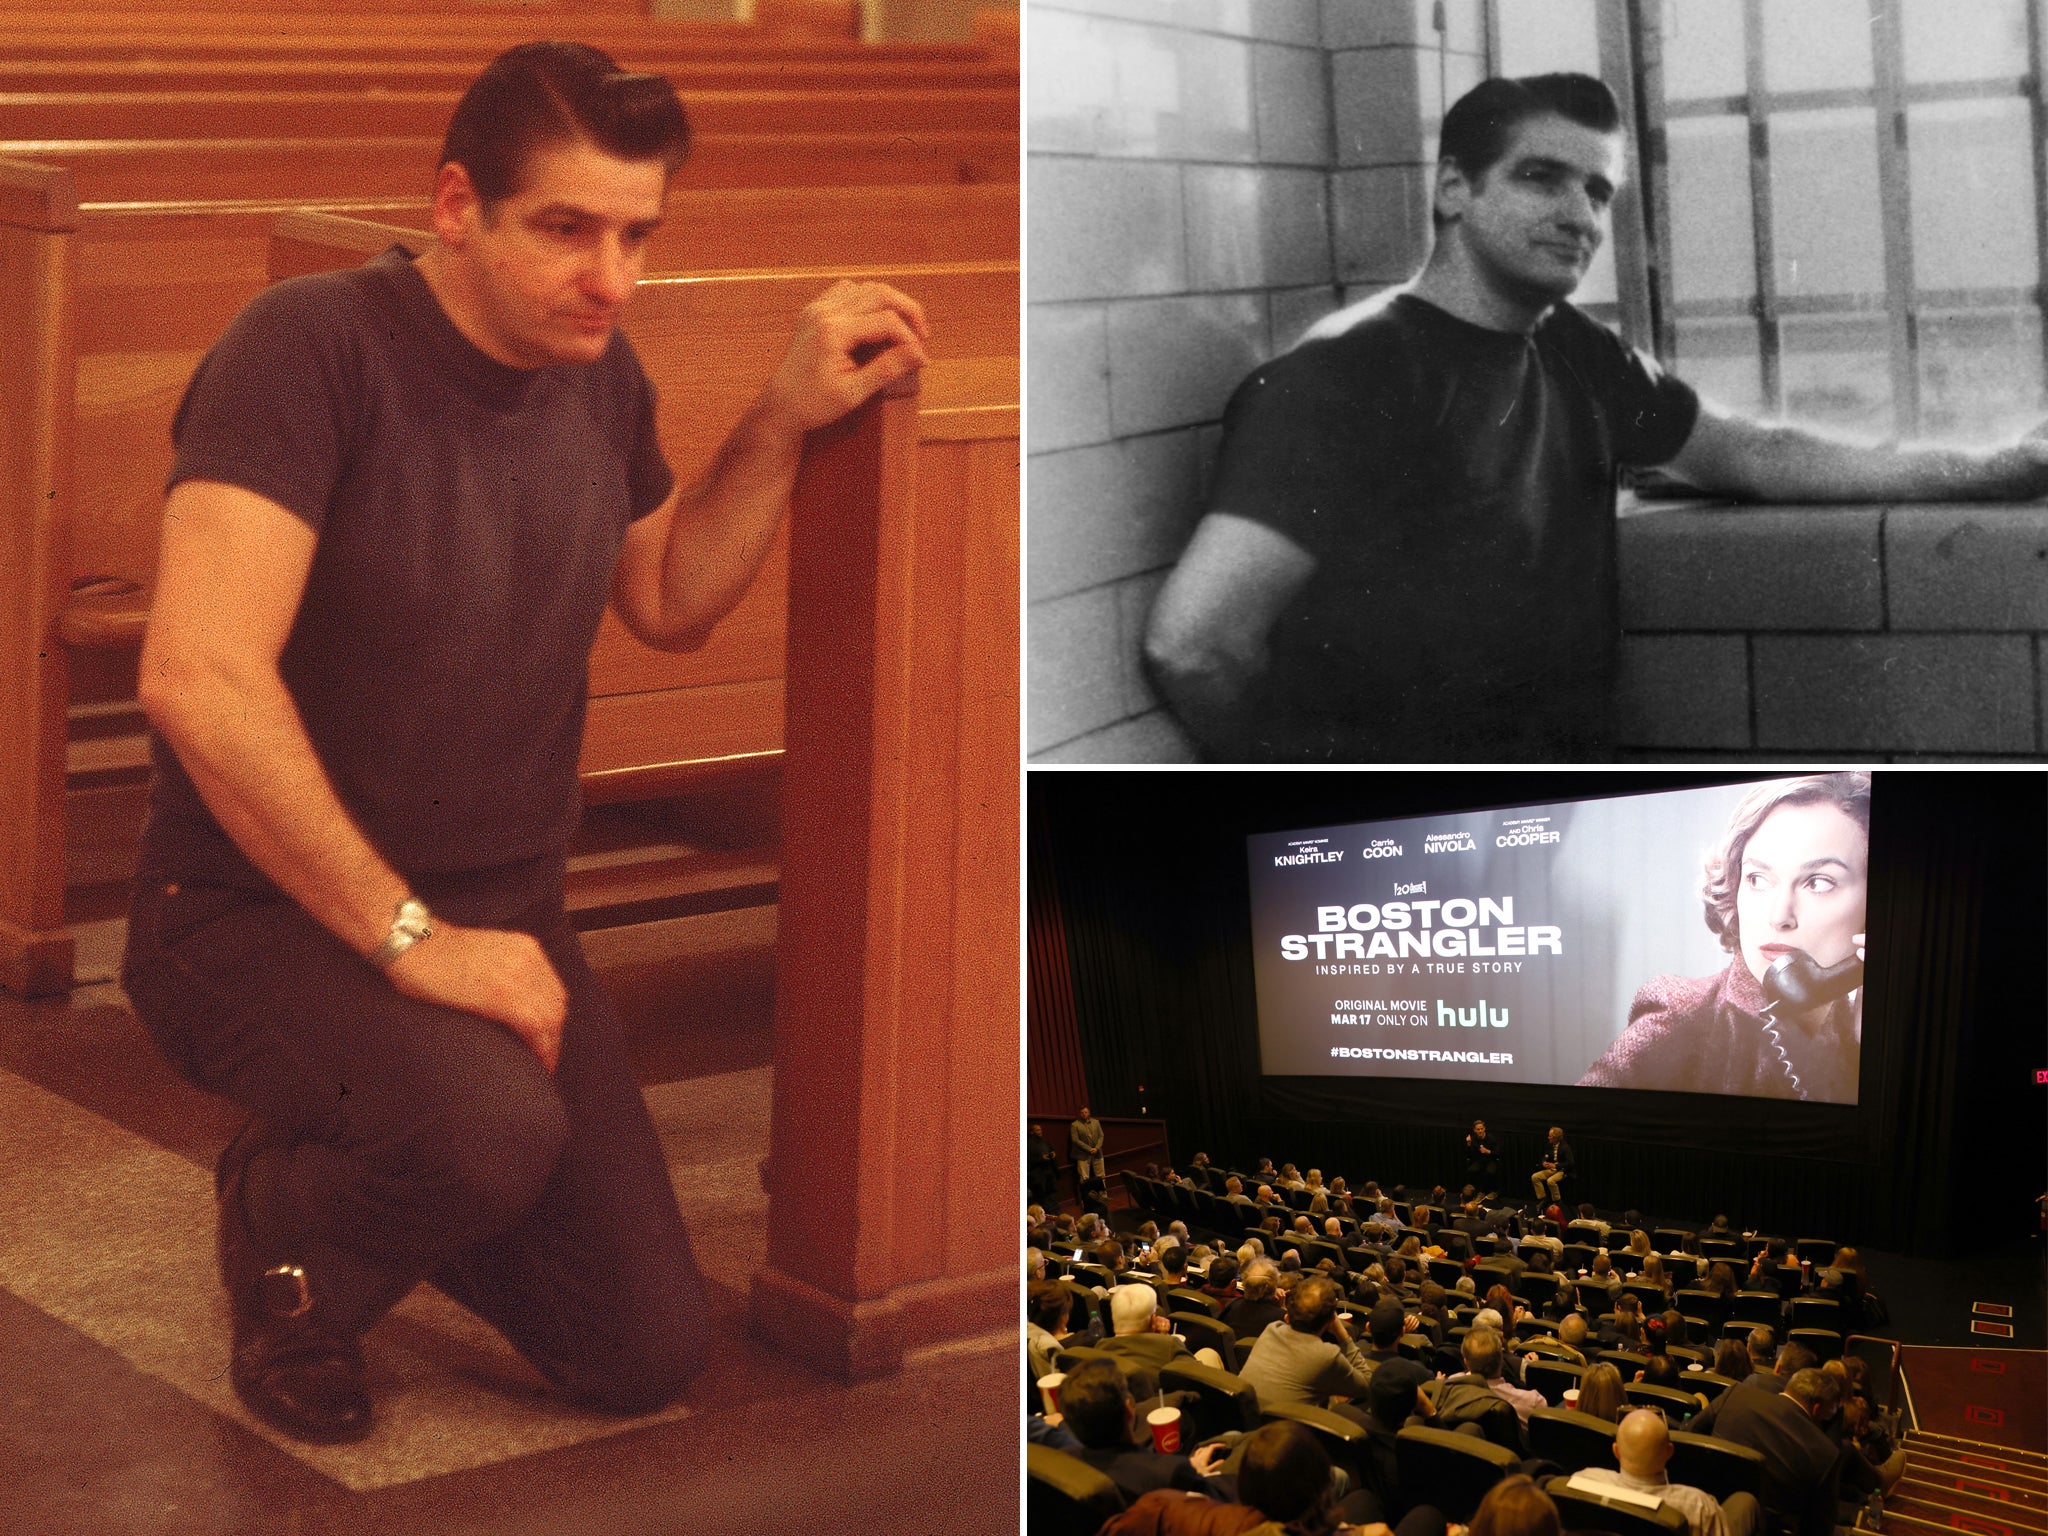 Left: Albert DeSalvo prays in the chapel at Walpole State Prison, South Walpole, Massachusetts, early 1970s; top right: DeSalvo stands in jail for charges unrelated to the Boston stranglings, in an undated photo; bottom right: Matt Ruskin and Dick Lehr participate in a Q&A during the Boston Strangler screening at AMC Boston Commons on 13 March 2023 in Boston, Massachusetts